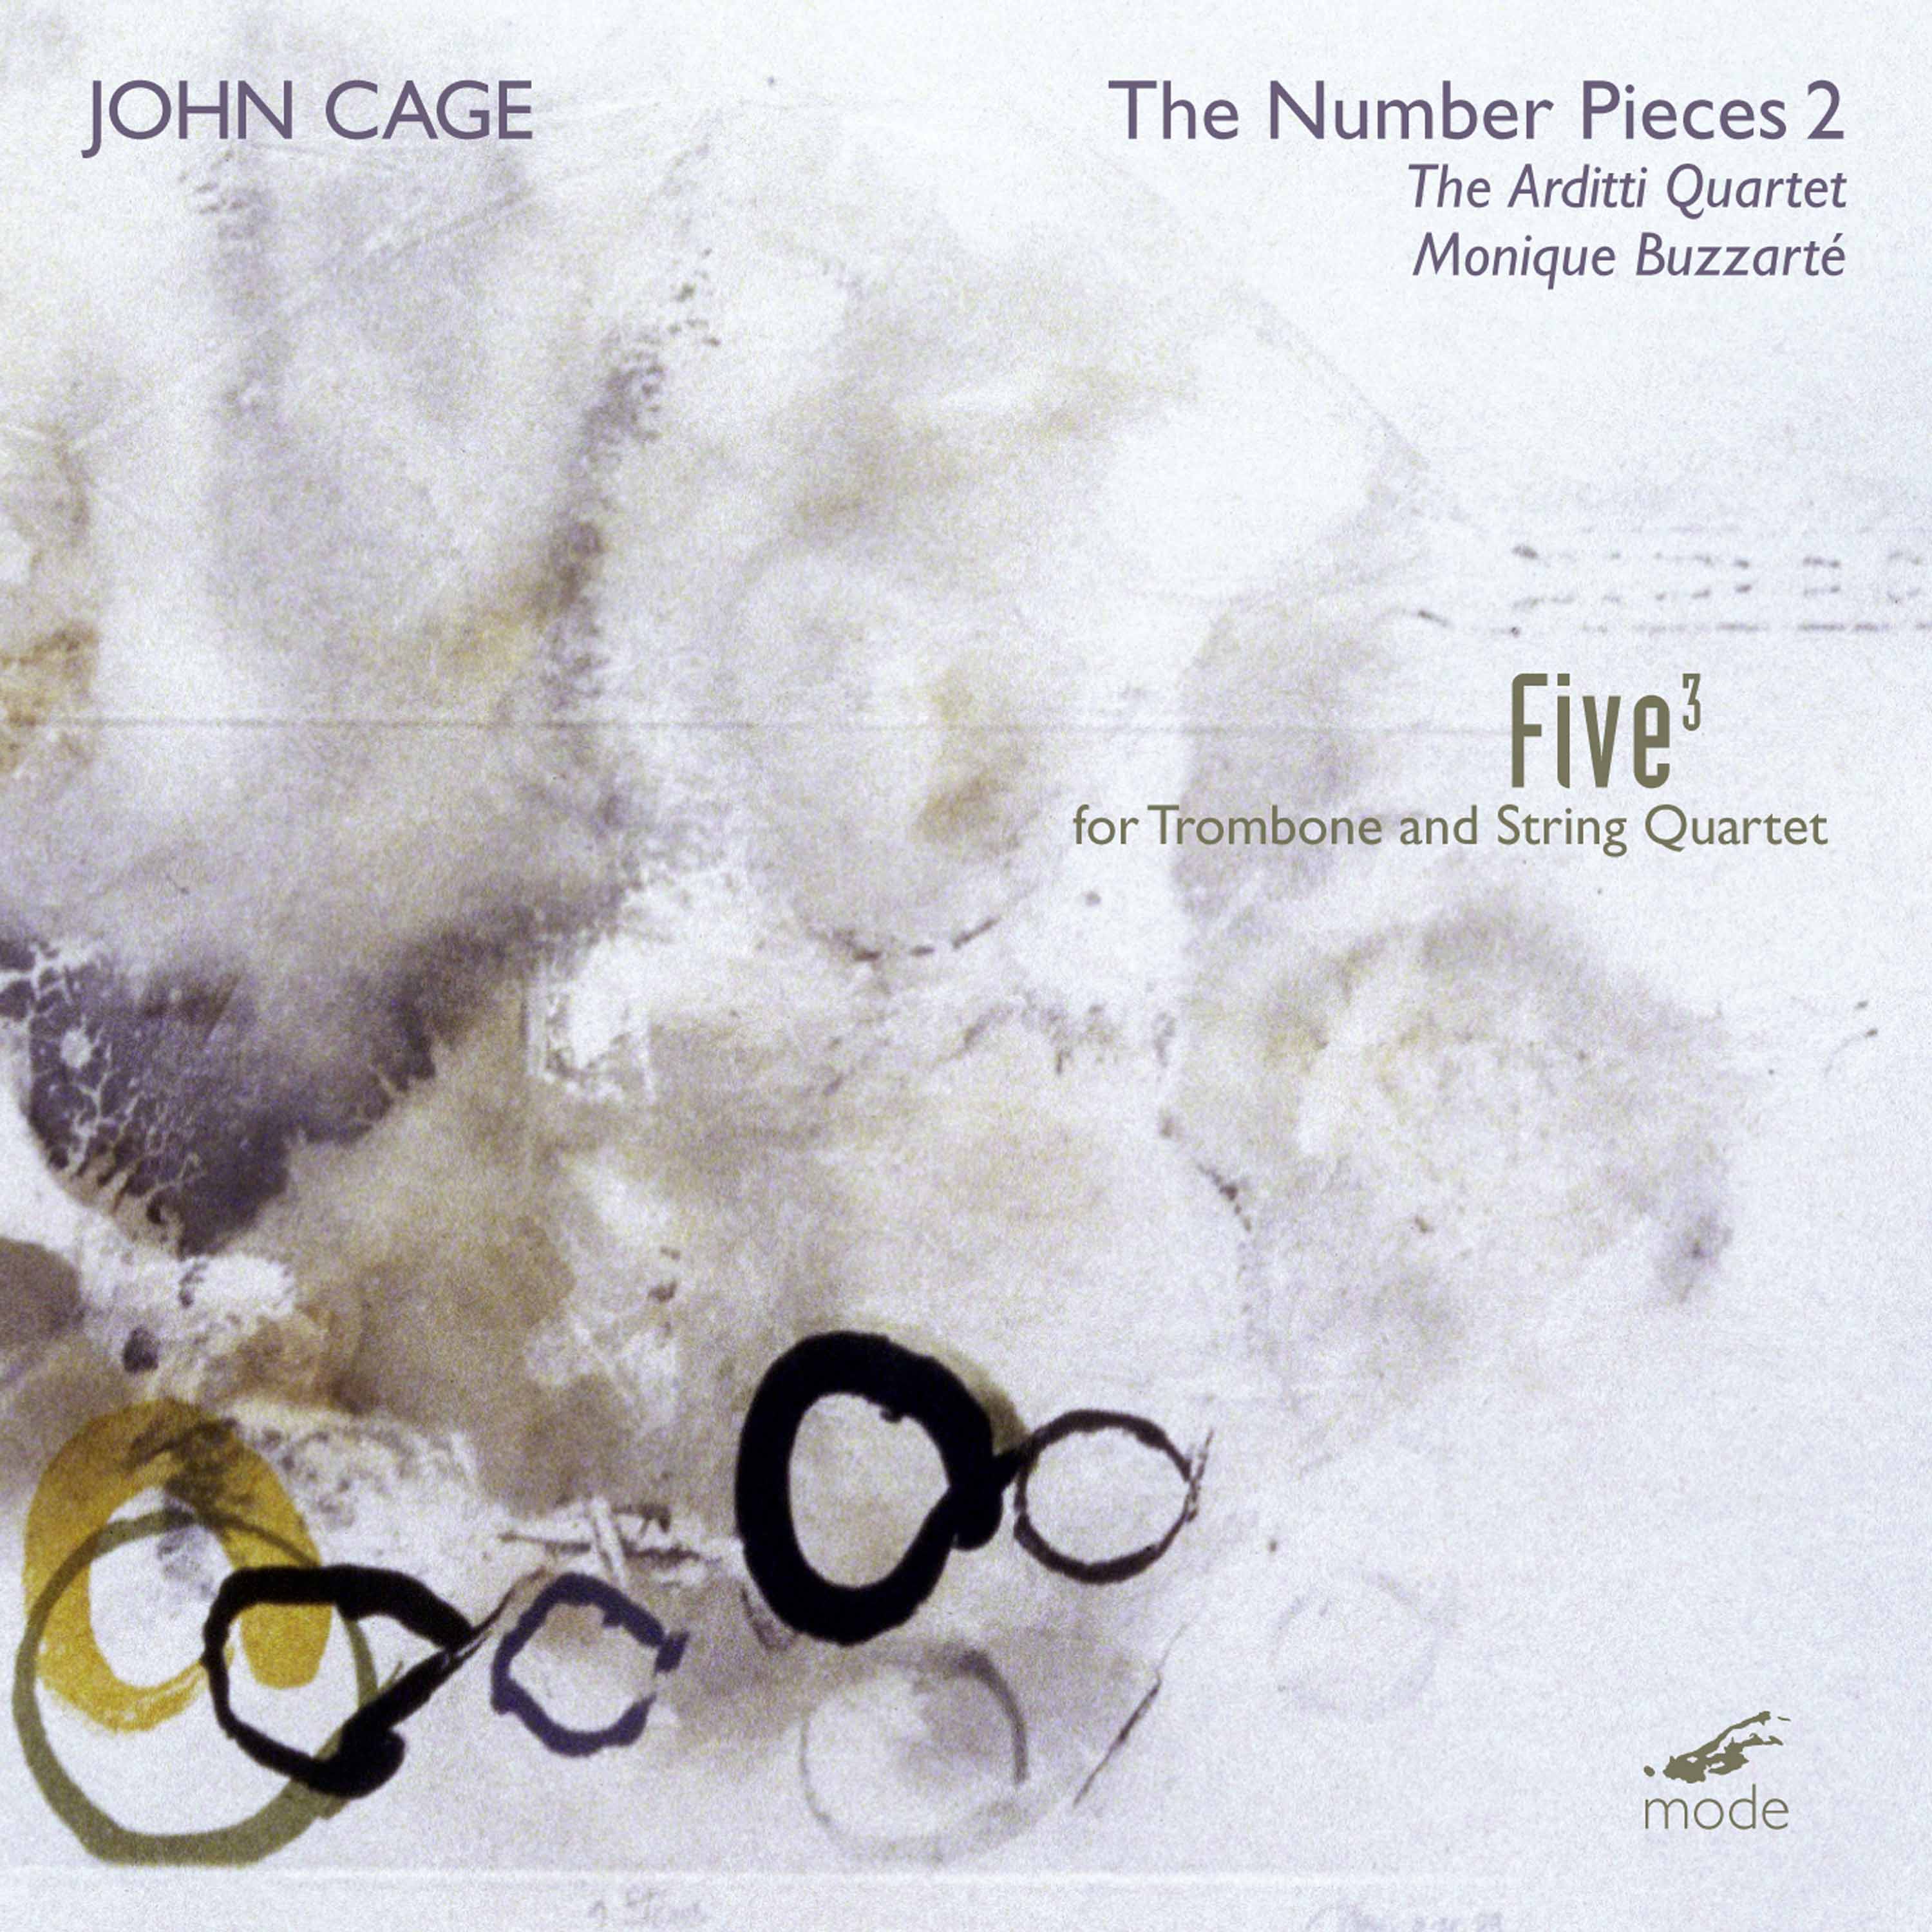 Cage: Five3